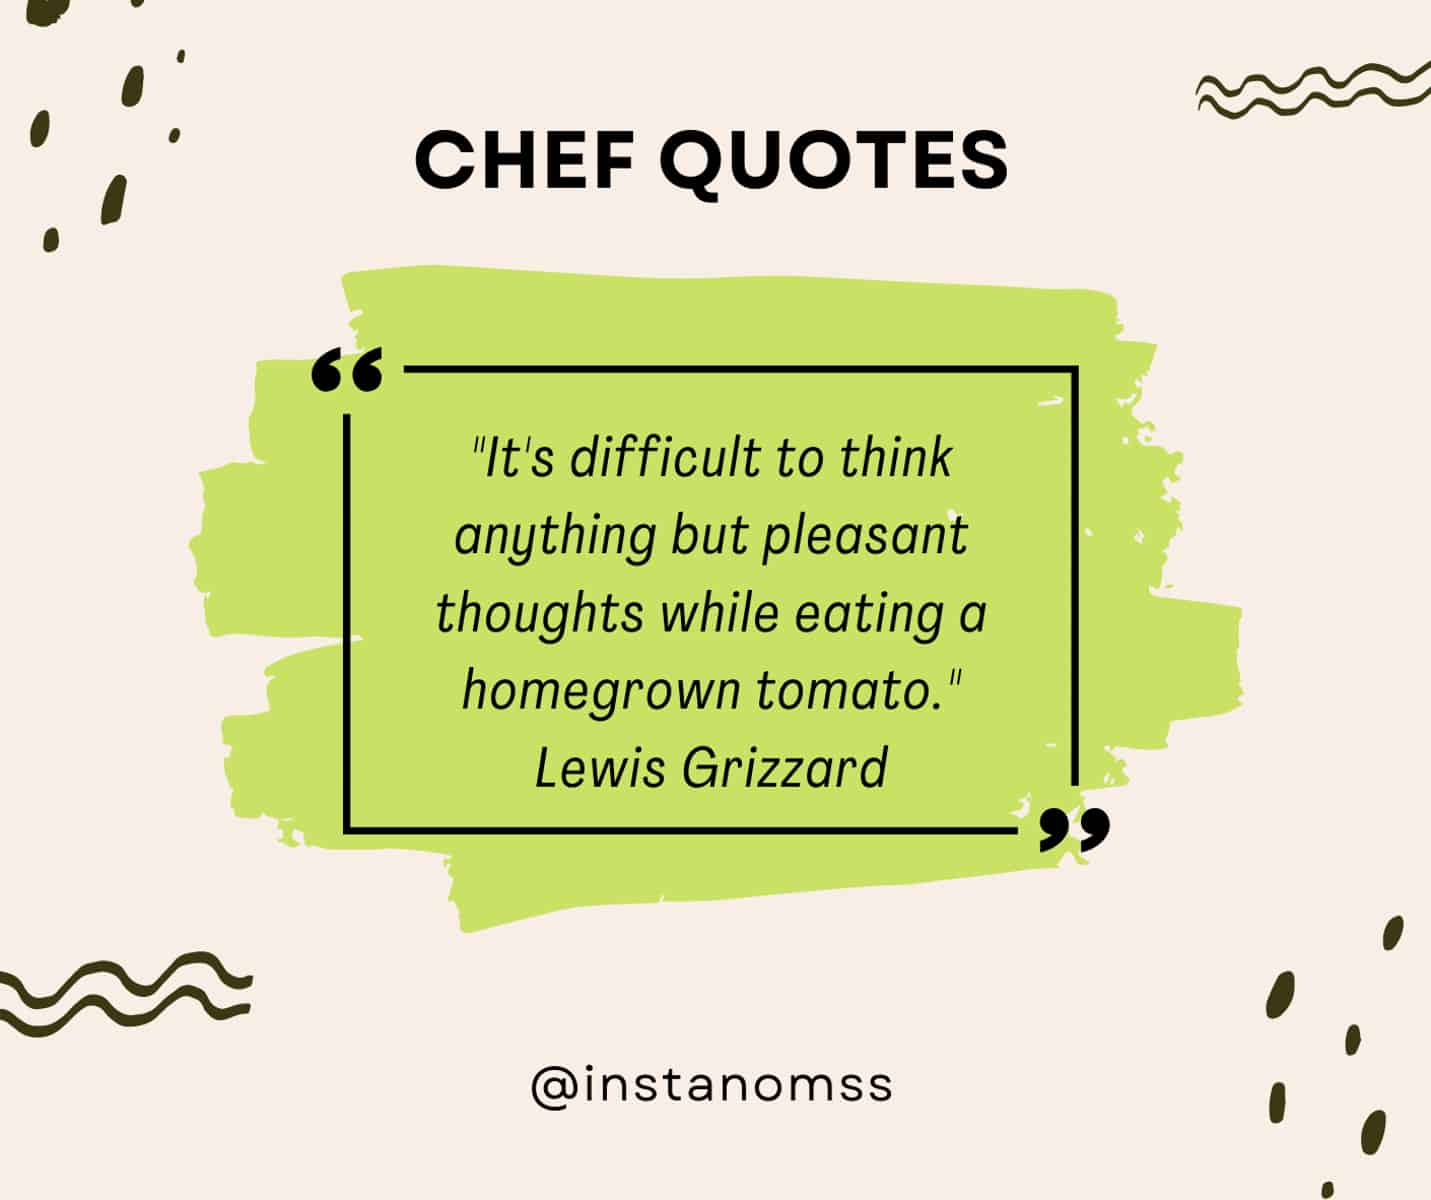 "It's difficult to think anything but pleasant thoughts while eating a homegrown tomato." Lewis Grizzard